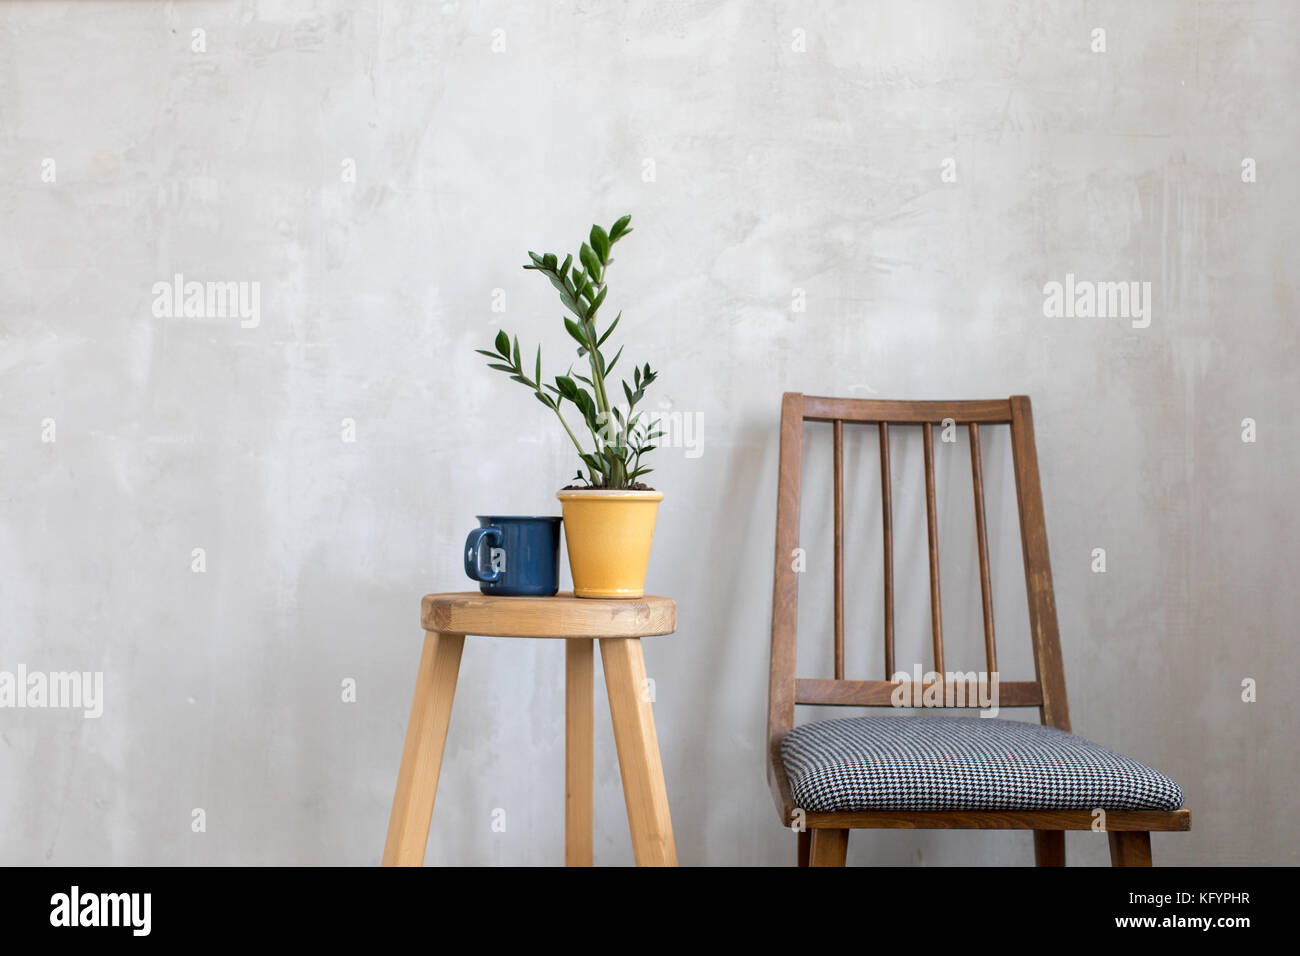 Interior shot of chair and decorative table Stock Photo